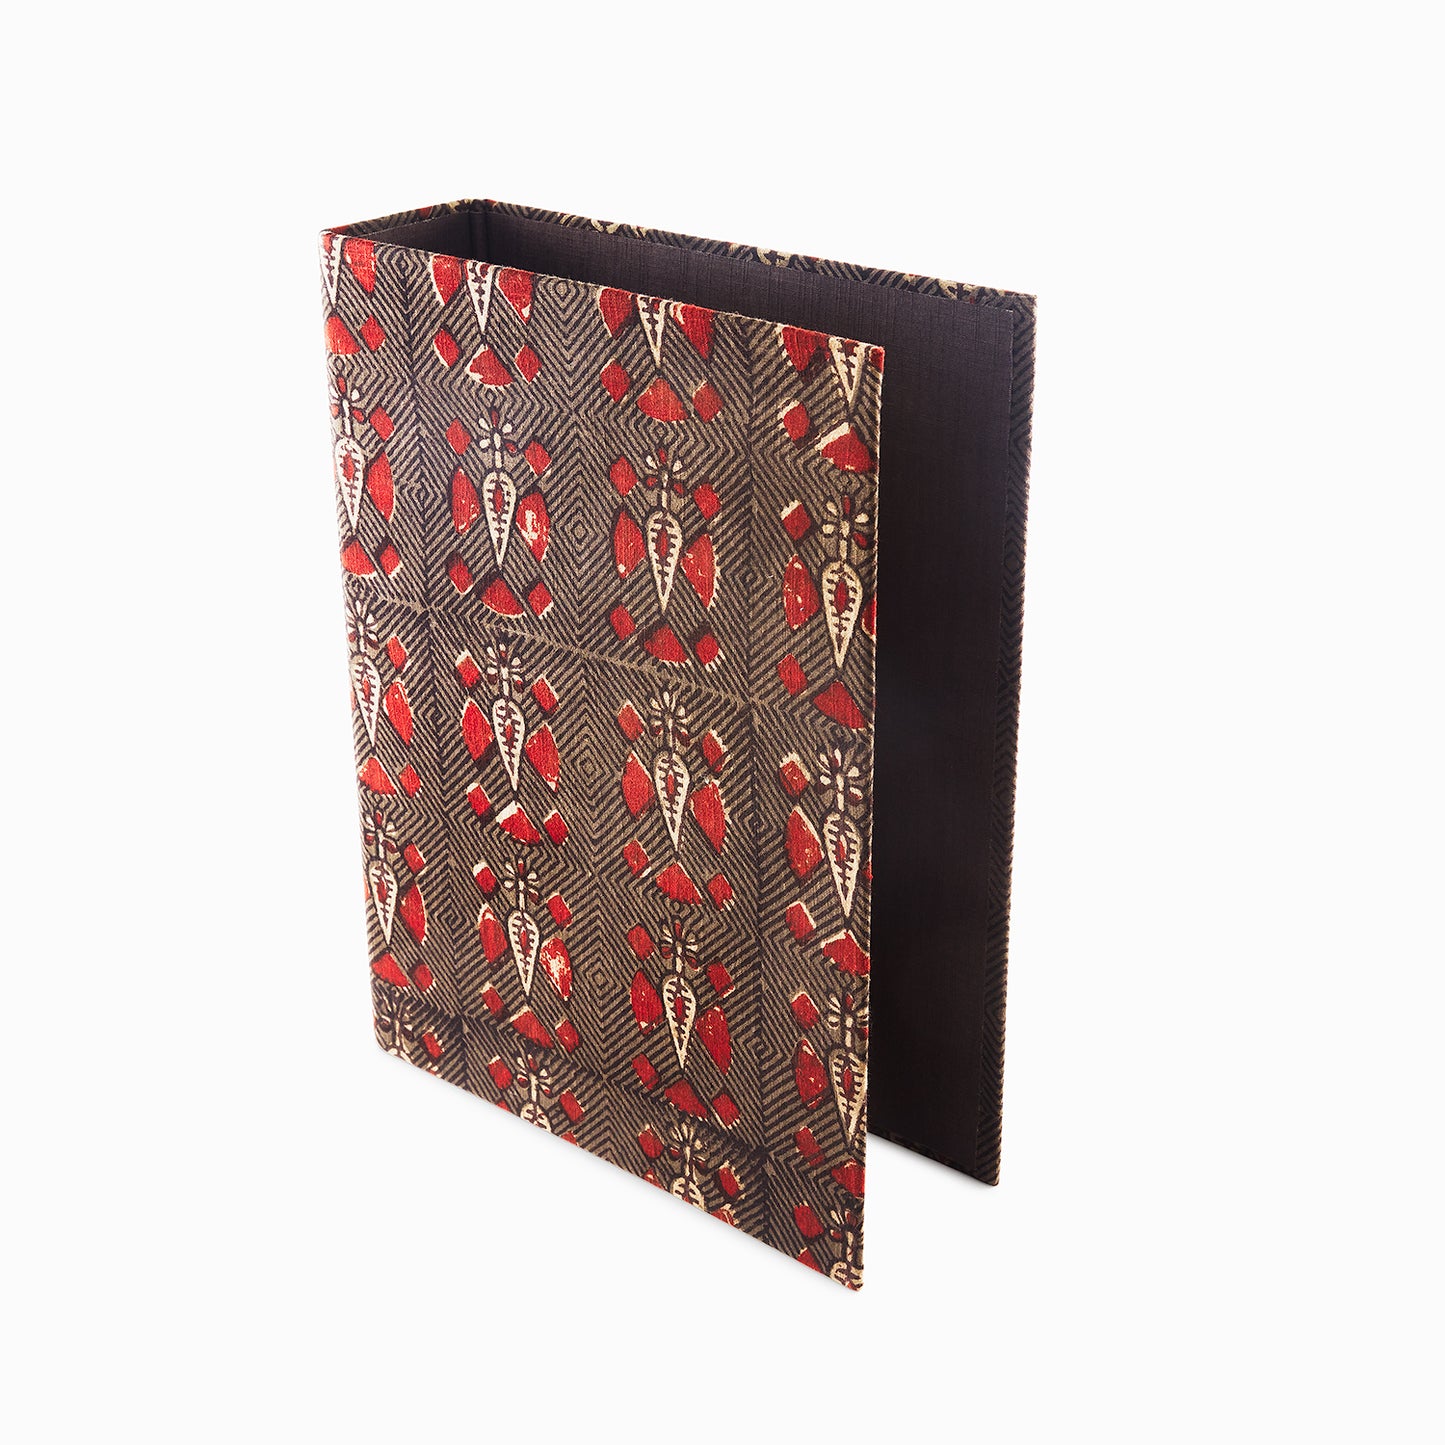 Umber Brown Colored Fabric with Block Print Design - Box Folder